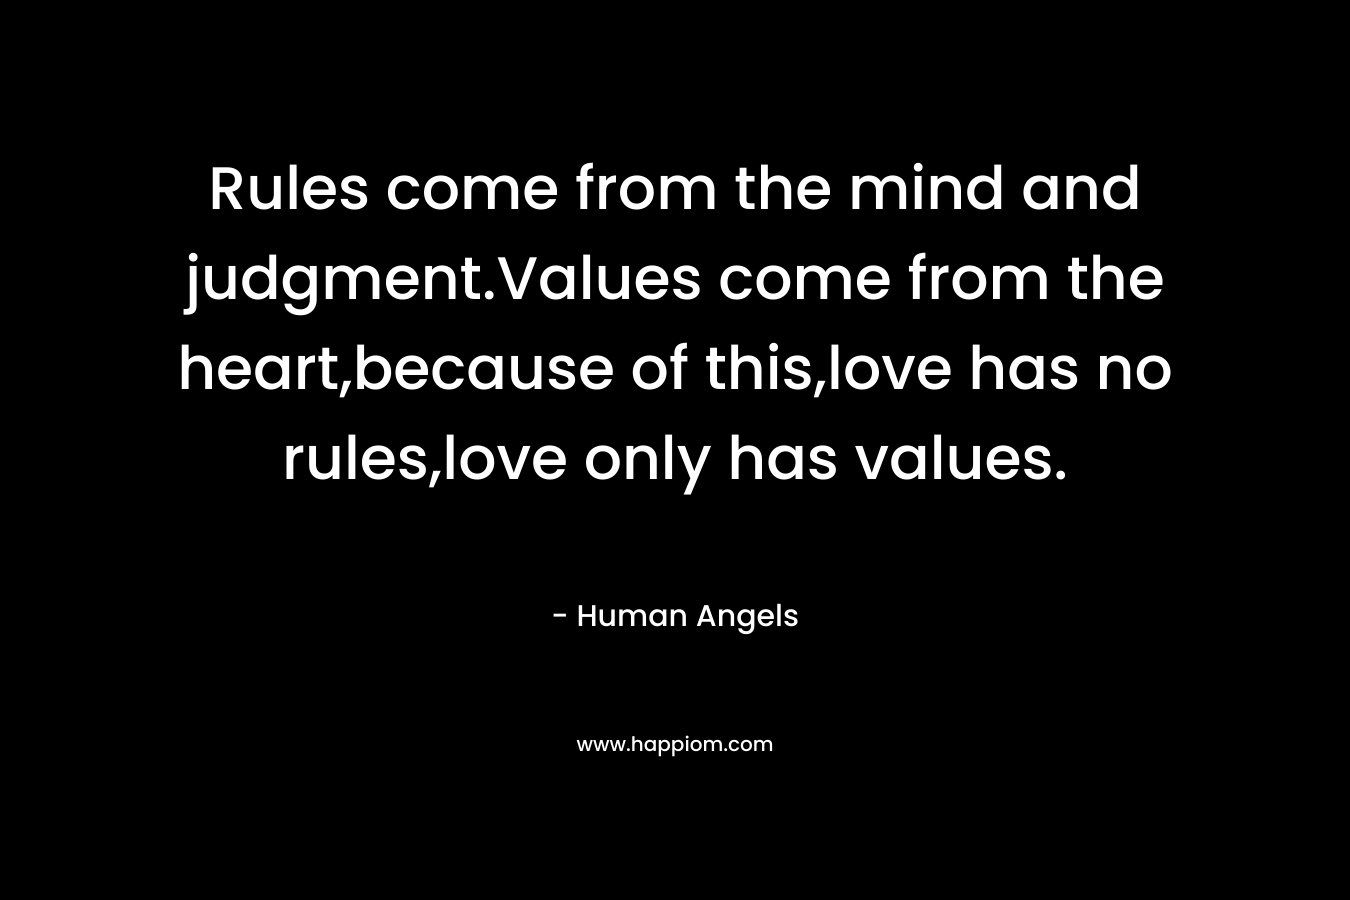 Rules come from the mind and judgment.Values come from the heart,because of this,love has no rules,love only has values. – Human Angels